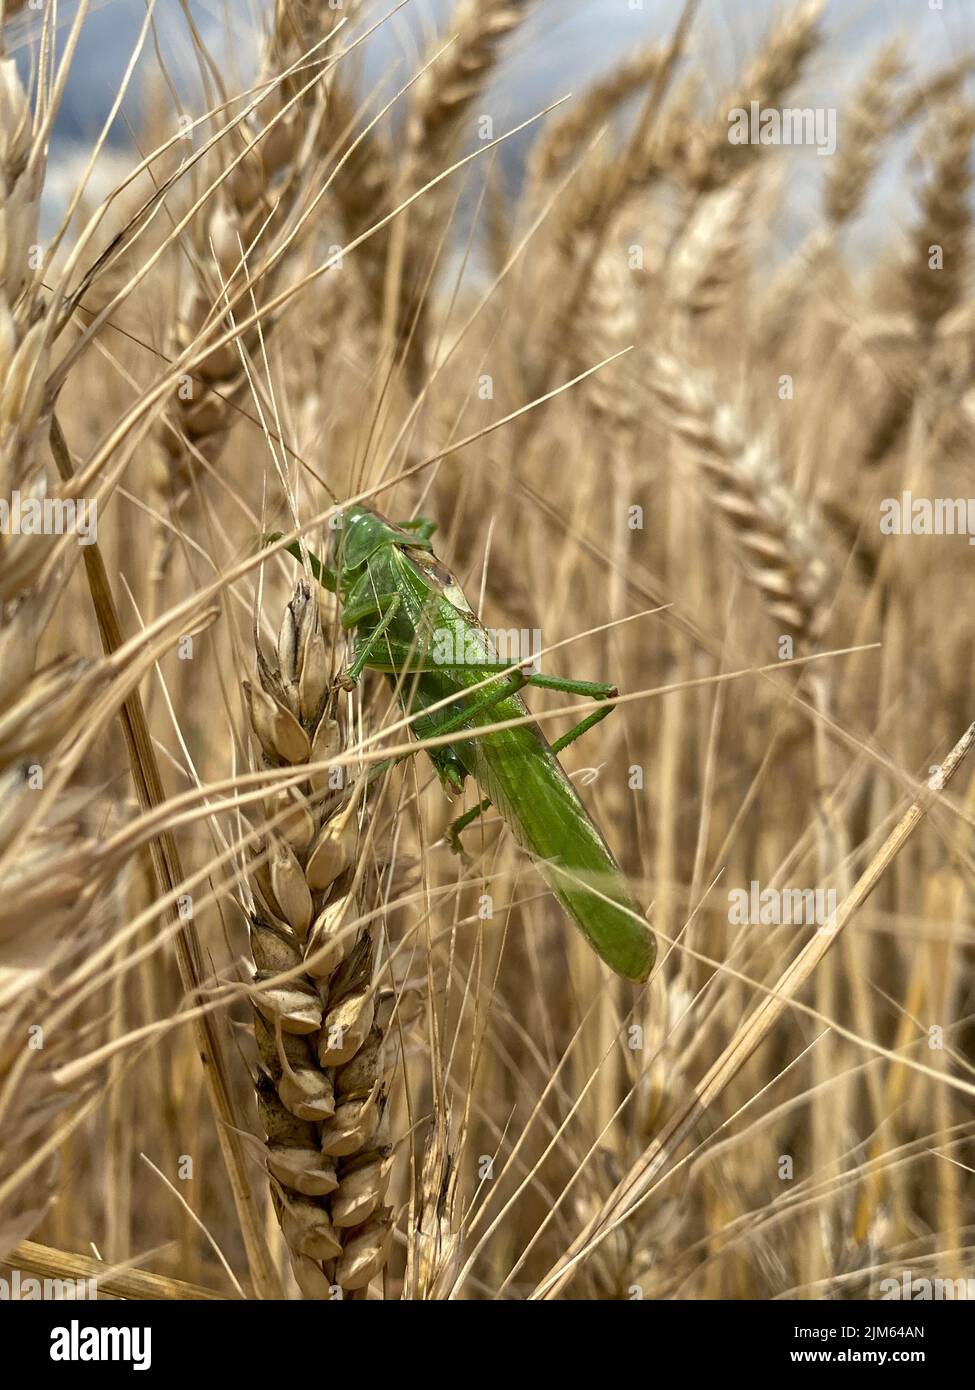 A closeup shot of a Great green bush-cricket insect on blossom growing wheat field on a sunny day Stock Photo